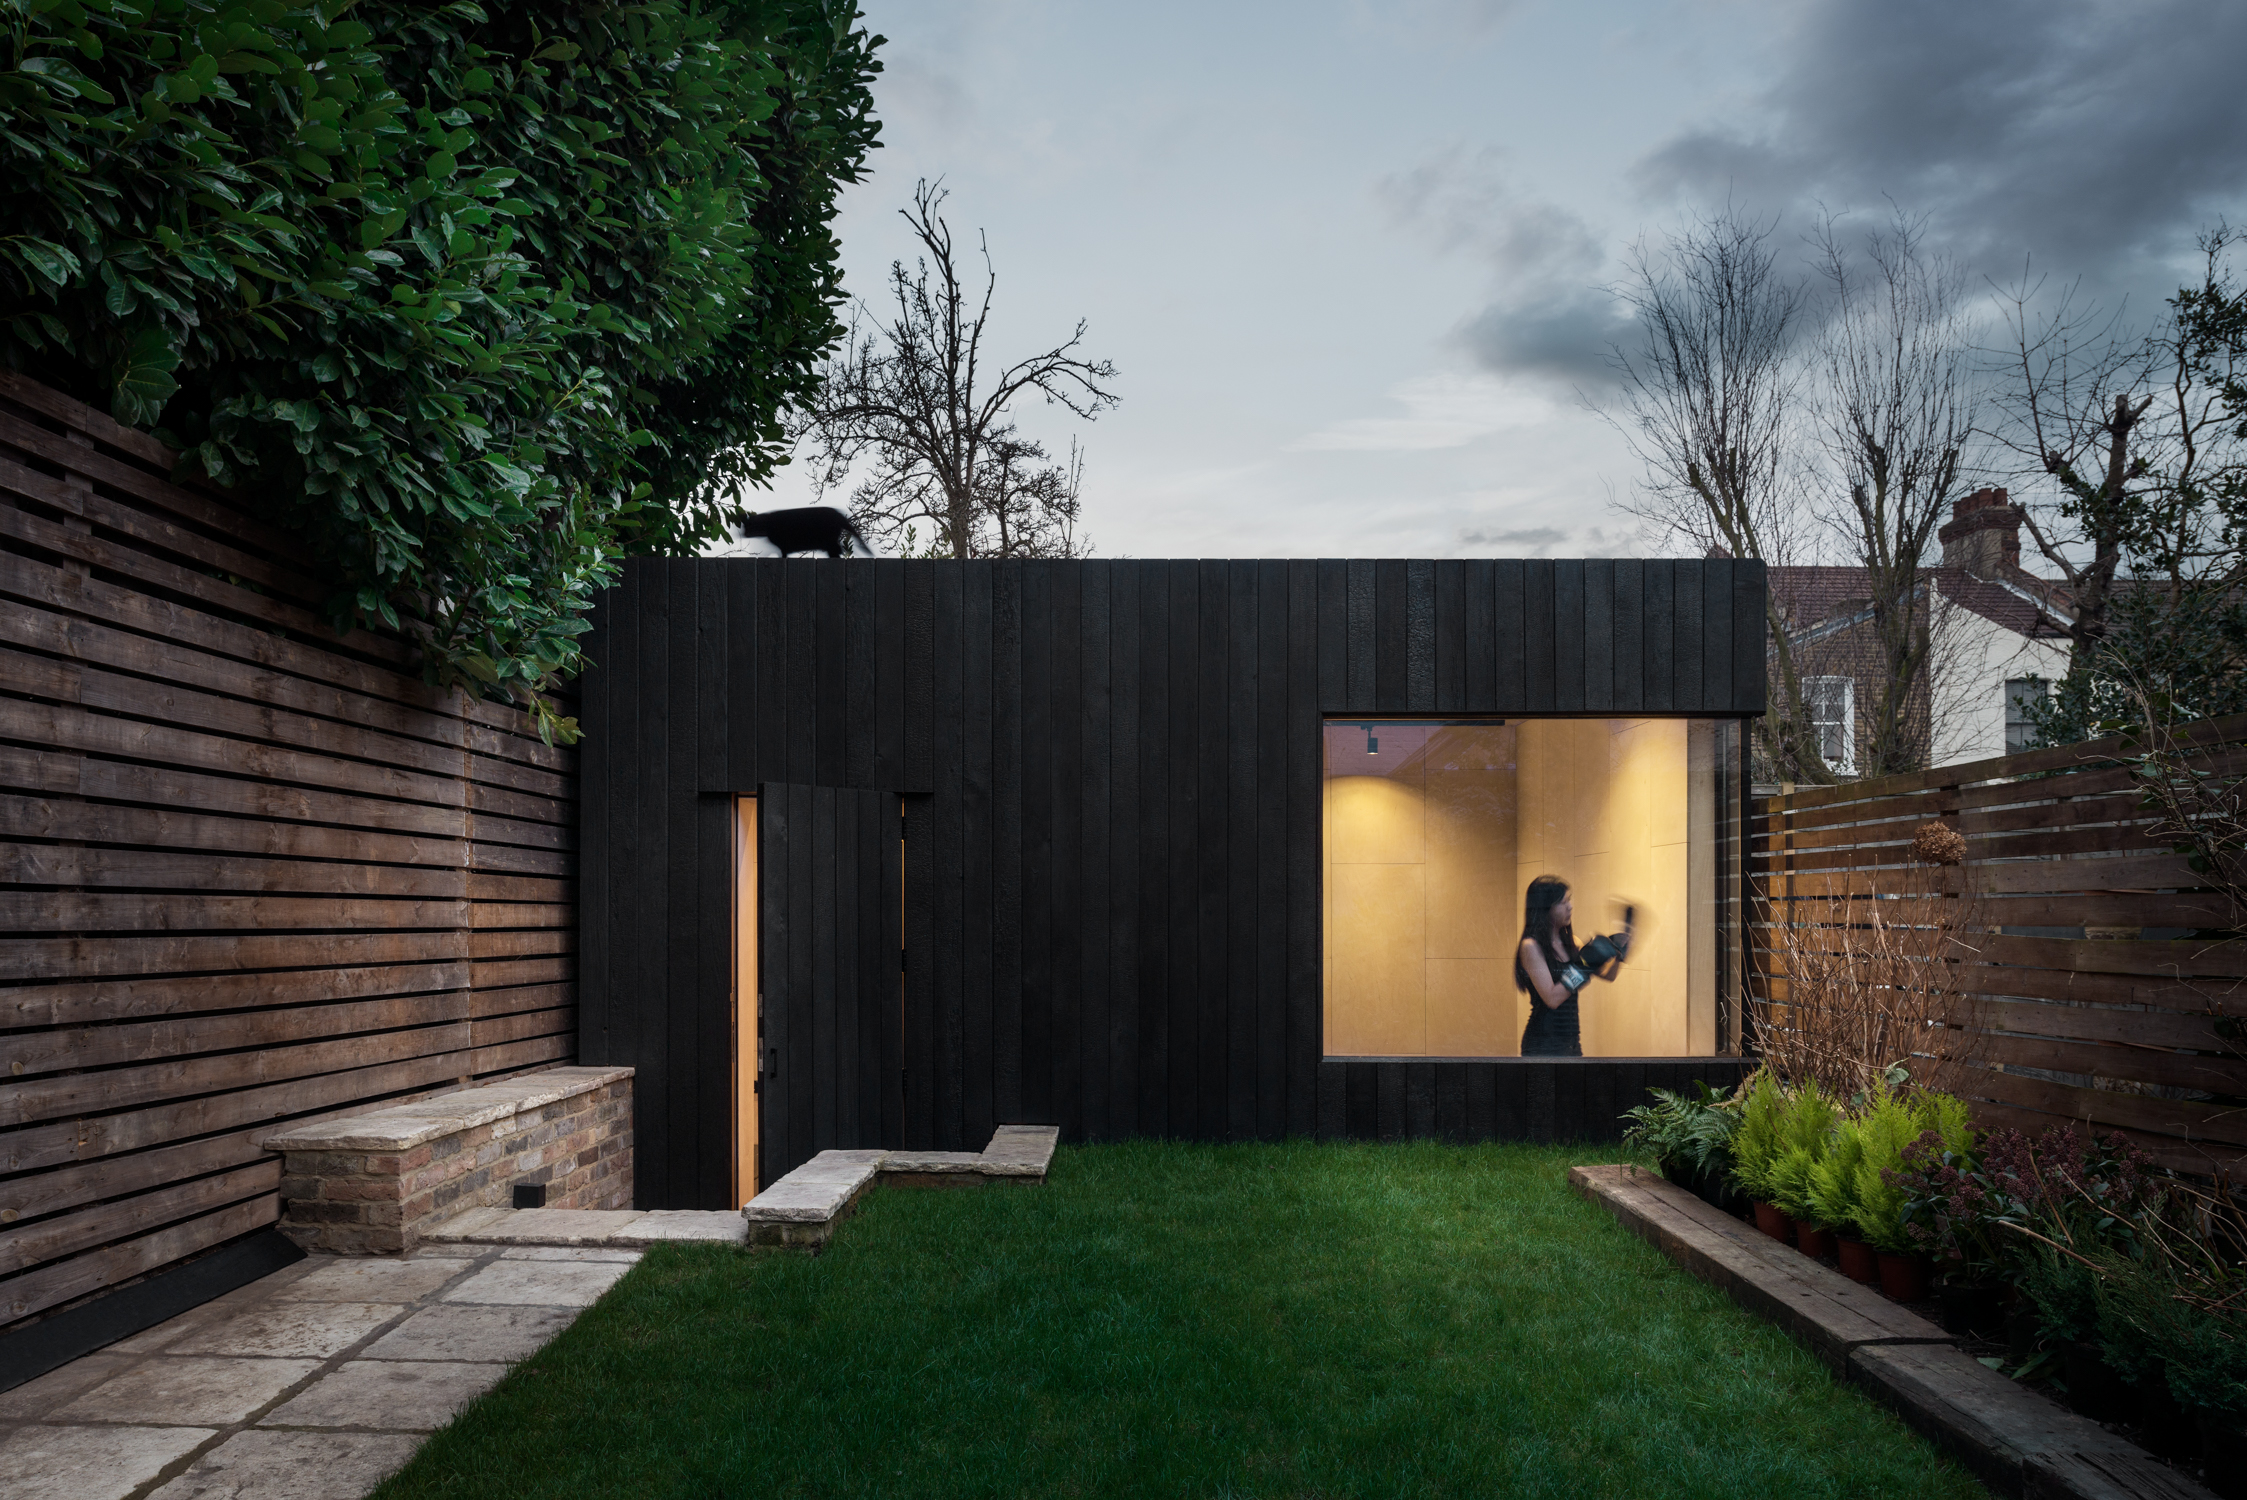 </p> <p>Find your ideal home design pro on designfor-me.com - get matched and see who's interested in your home project. Click image to see more inspiration from our design pros</p> <p>Design by Dean, architect from Hackney, London</p> <p>#architecture #homedesign #modernhomes #homeinspiration #gardenroom </p> <p>